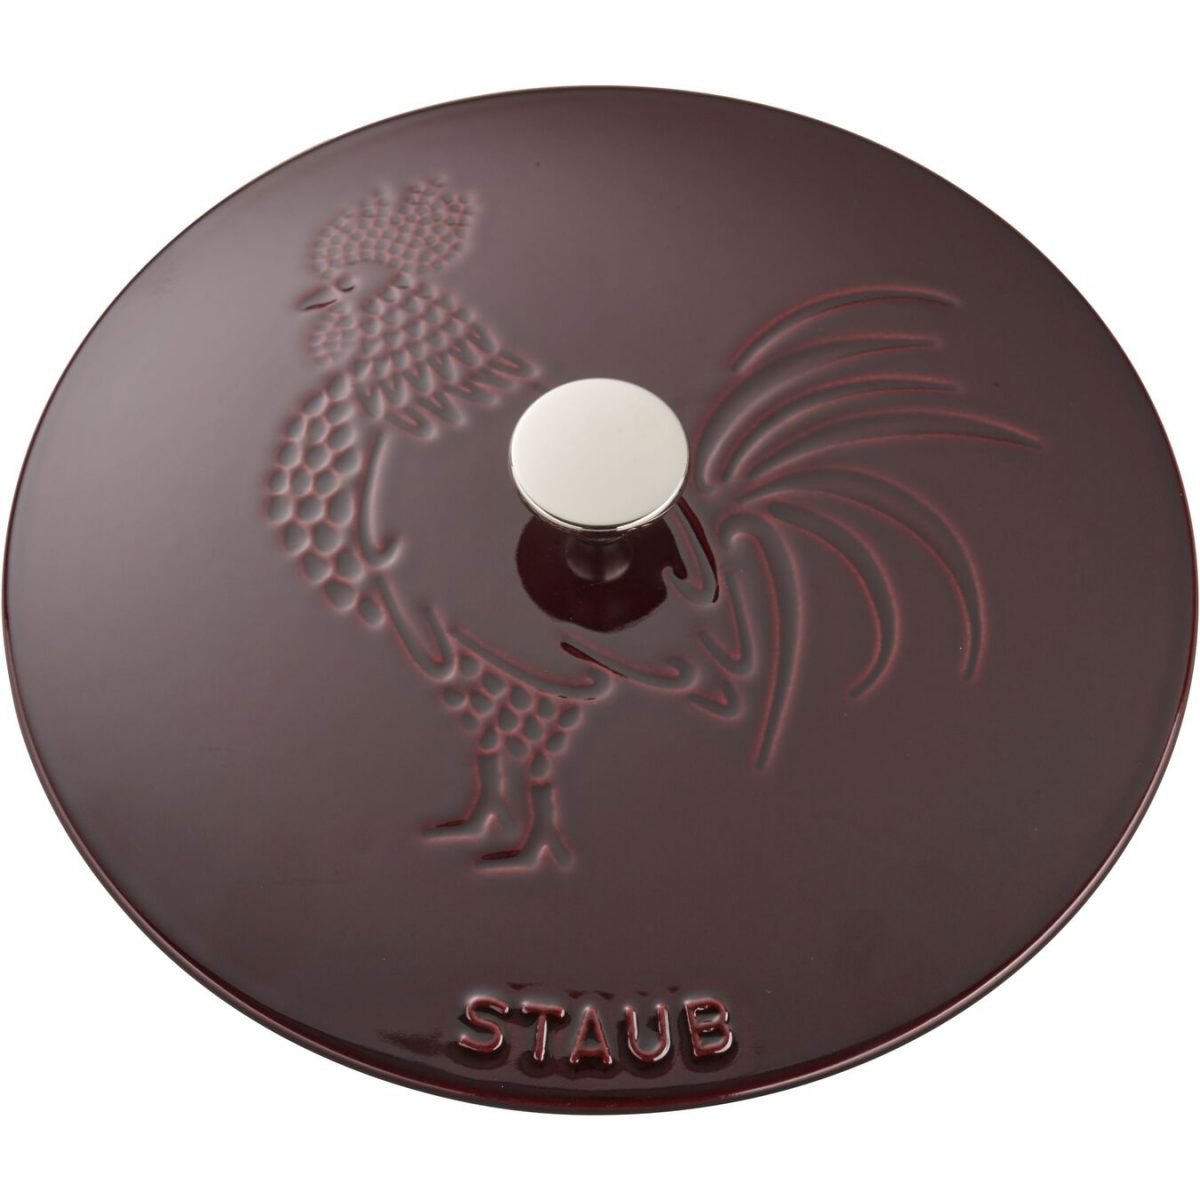 Staub Cast Iron Rooster Cocotte 24 cm 10